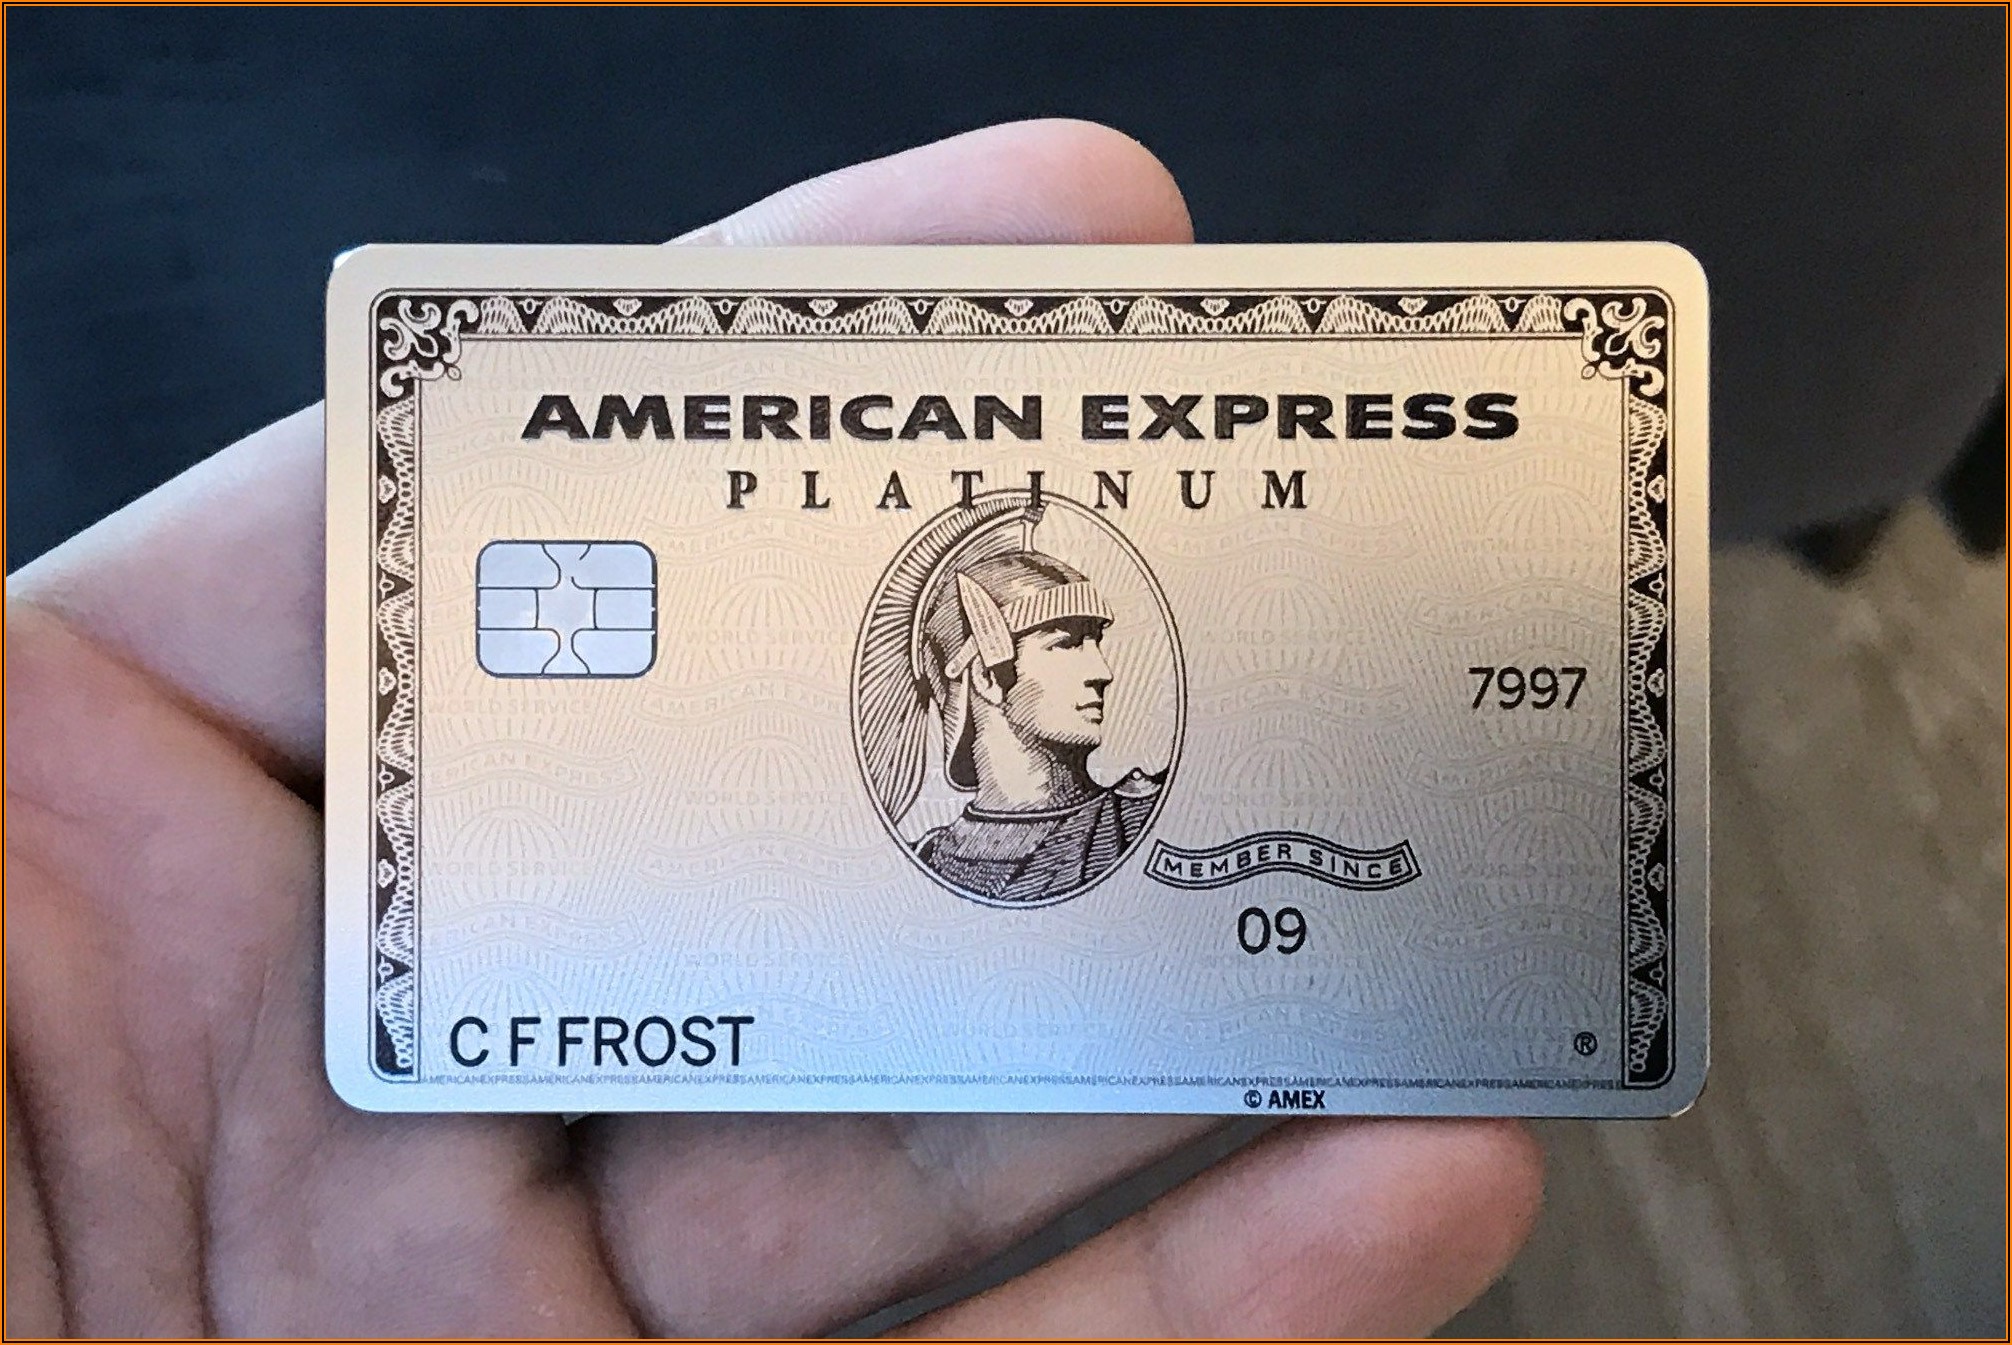 Amex Small Business Charge Card